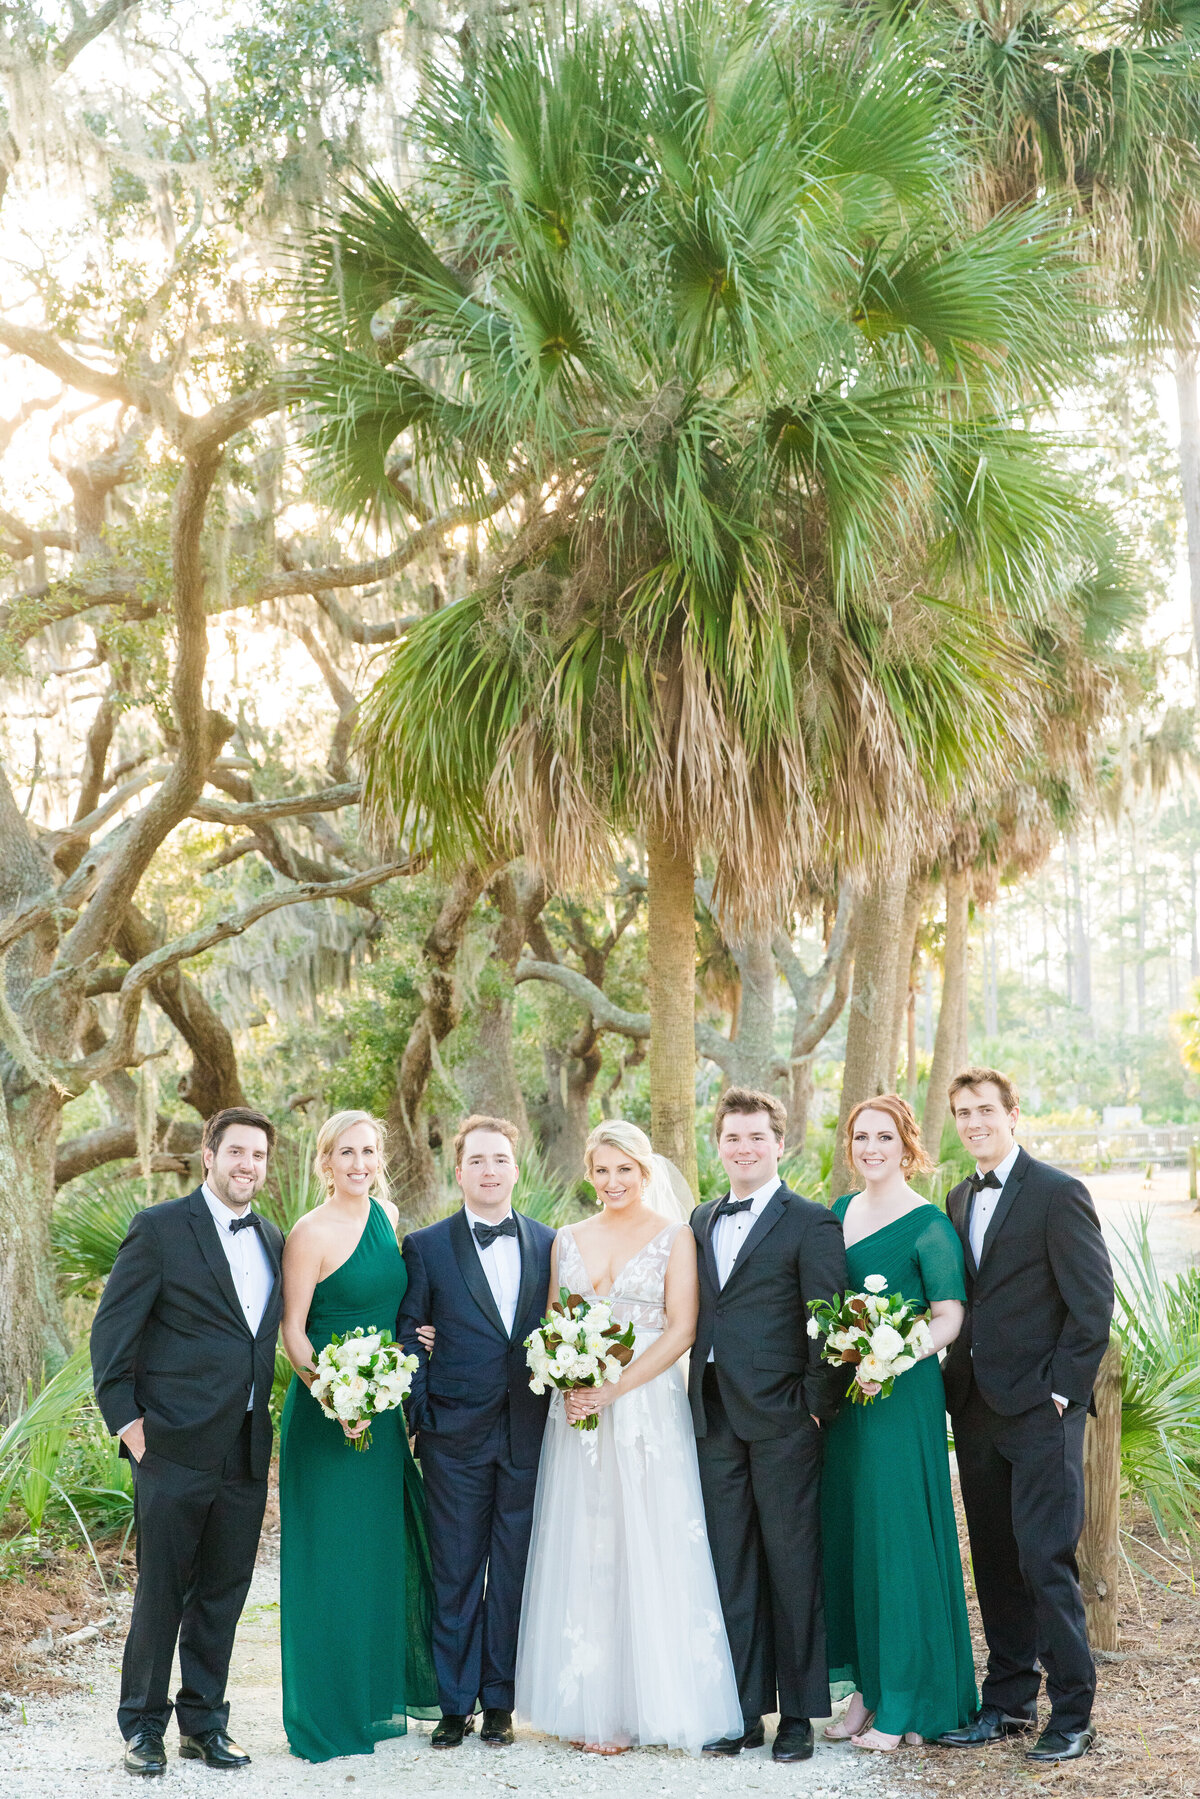 Bridal party portraits after wedding at Palmetto Bluff in South Carolina. Photographed by Dana Cubbage Weddings.